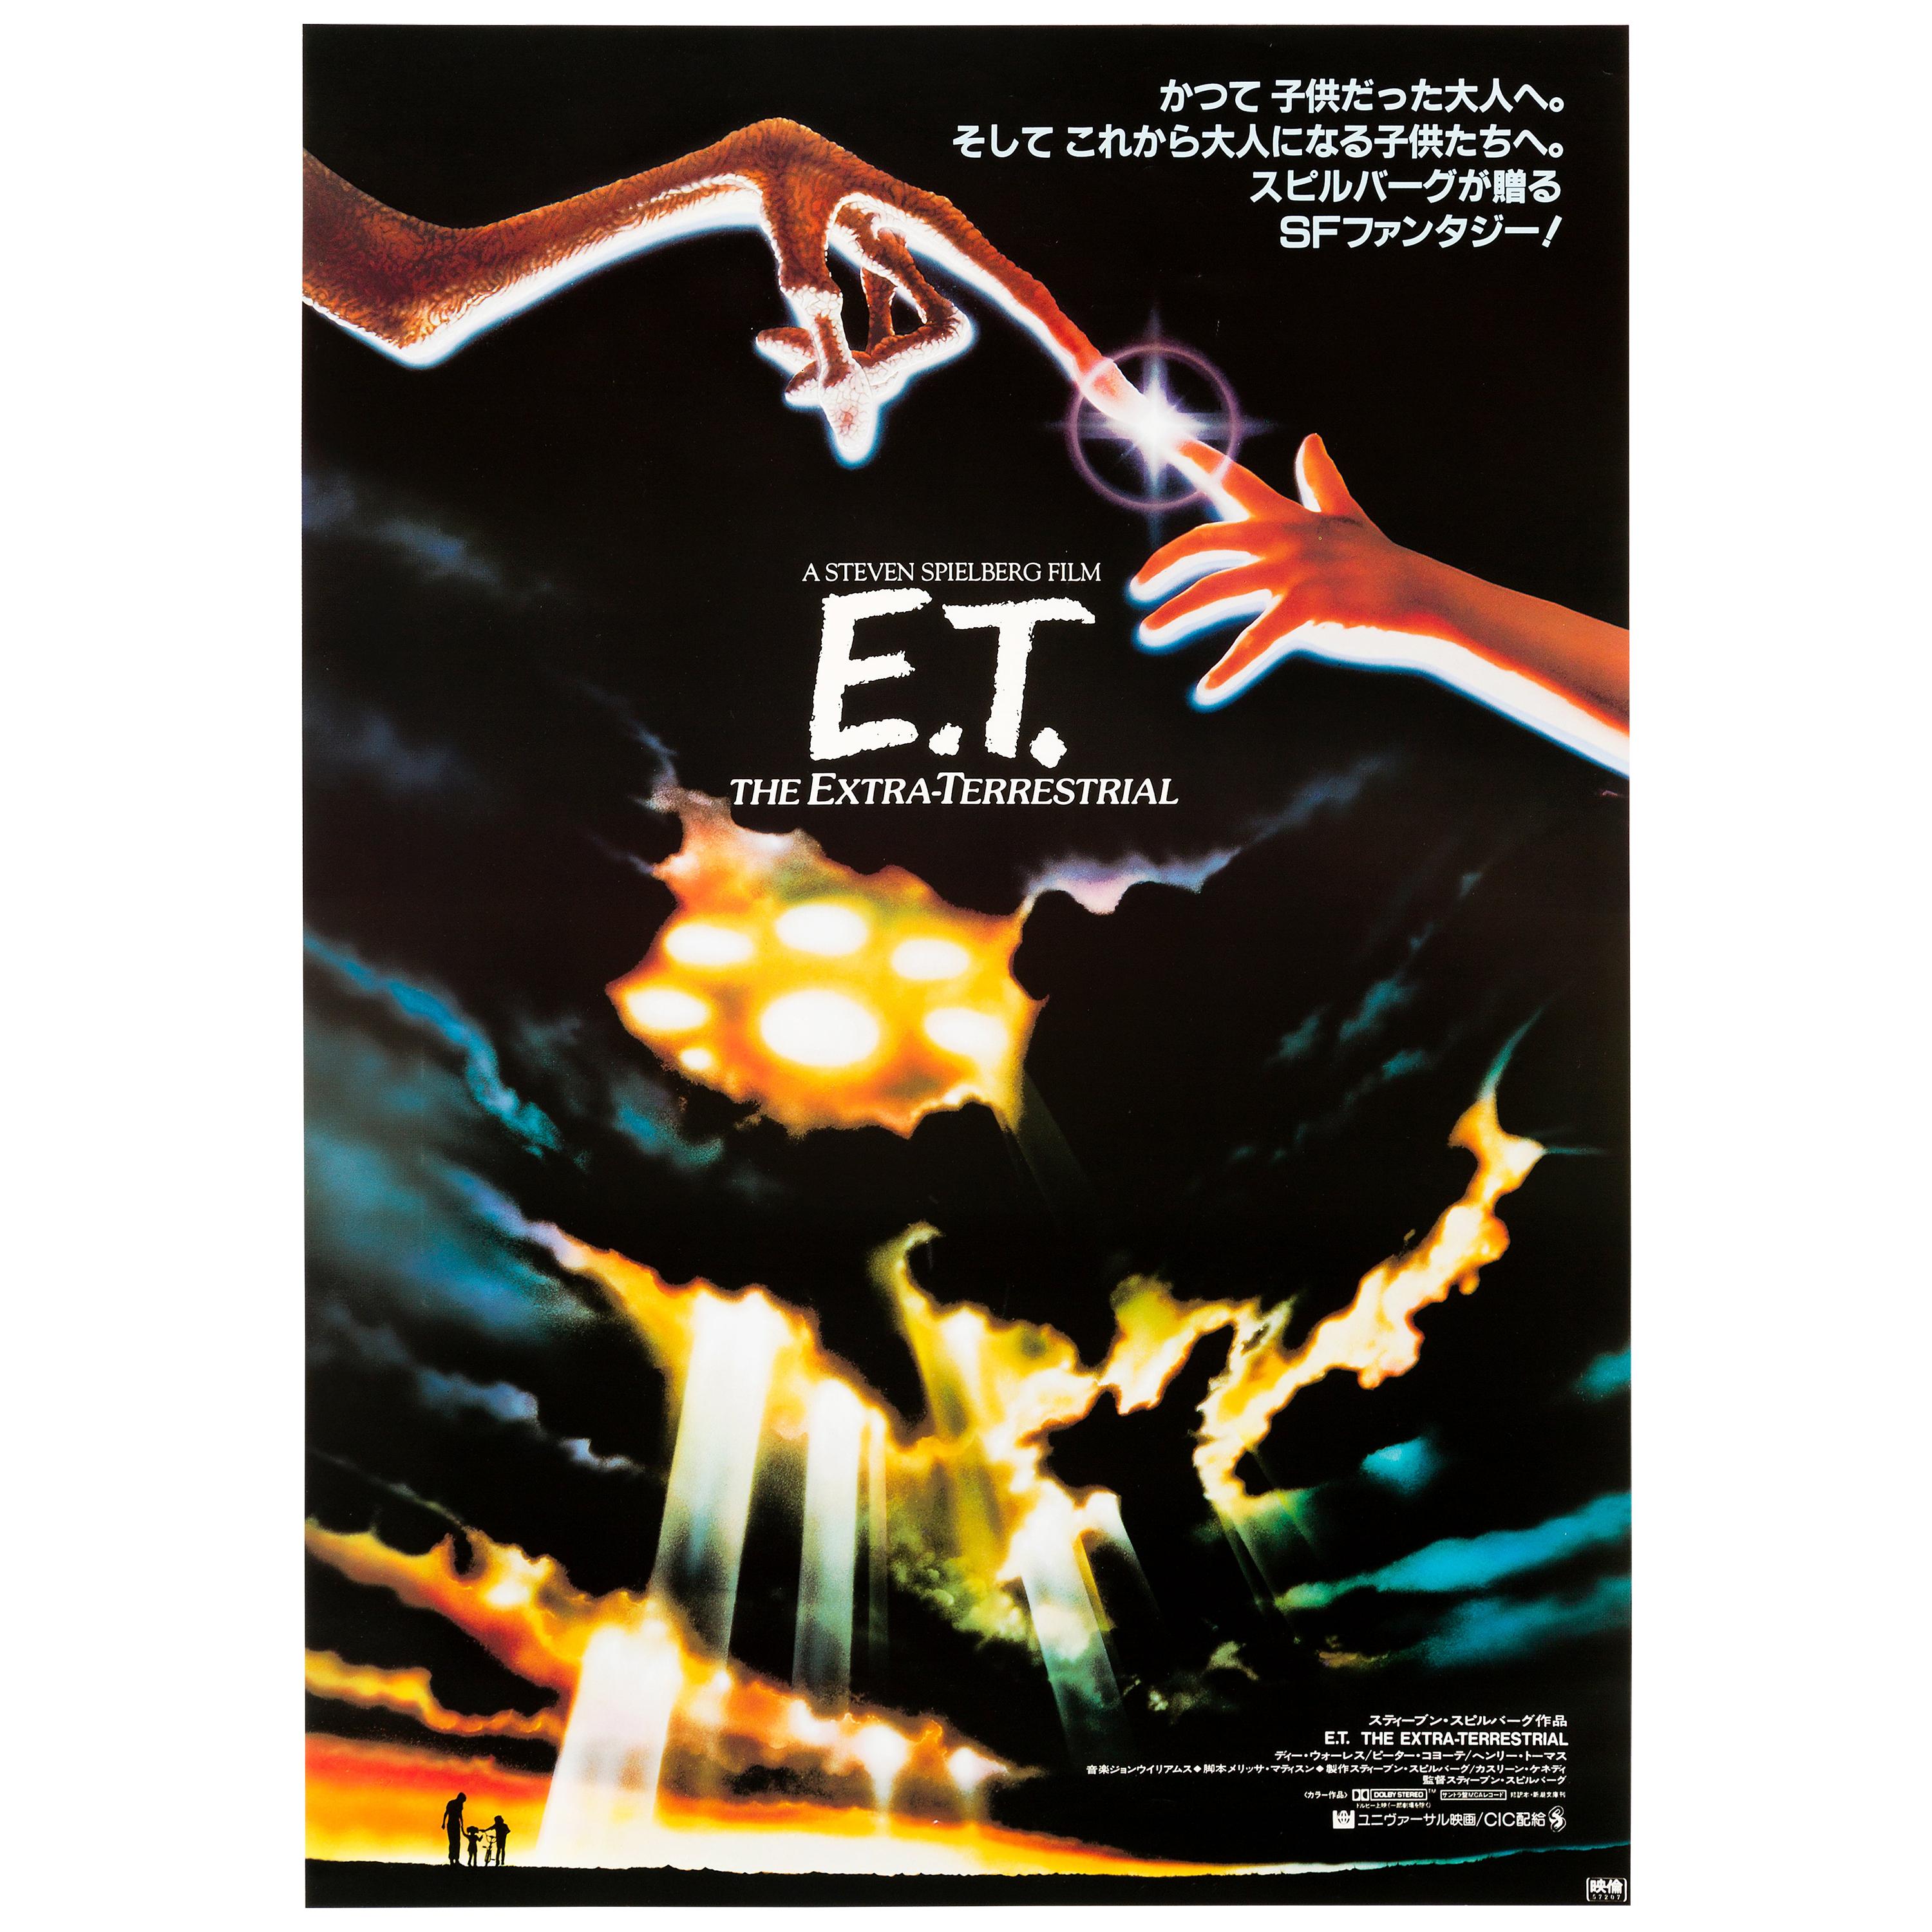 'E.T. The Extra Terrestrial' Original Vintage Japanese Movie Poster, 1982